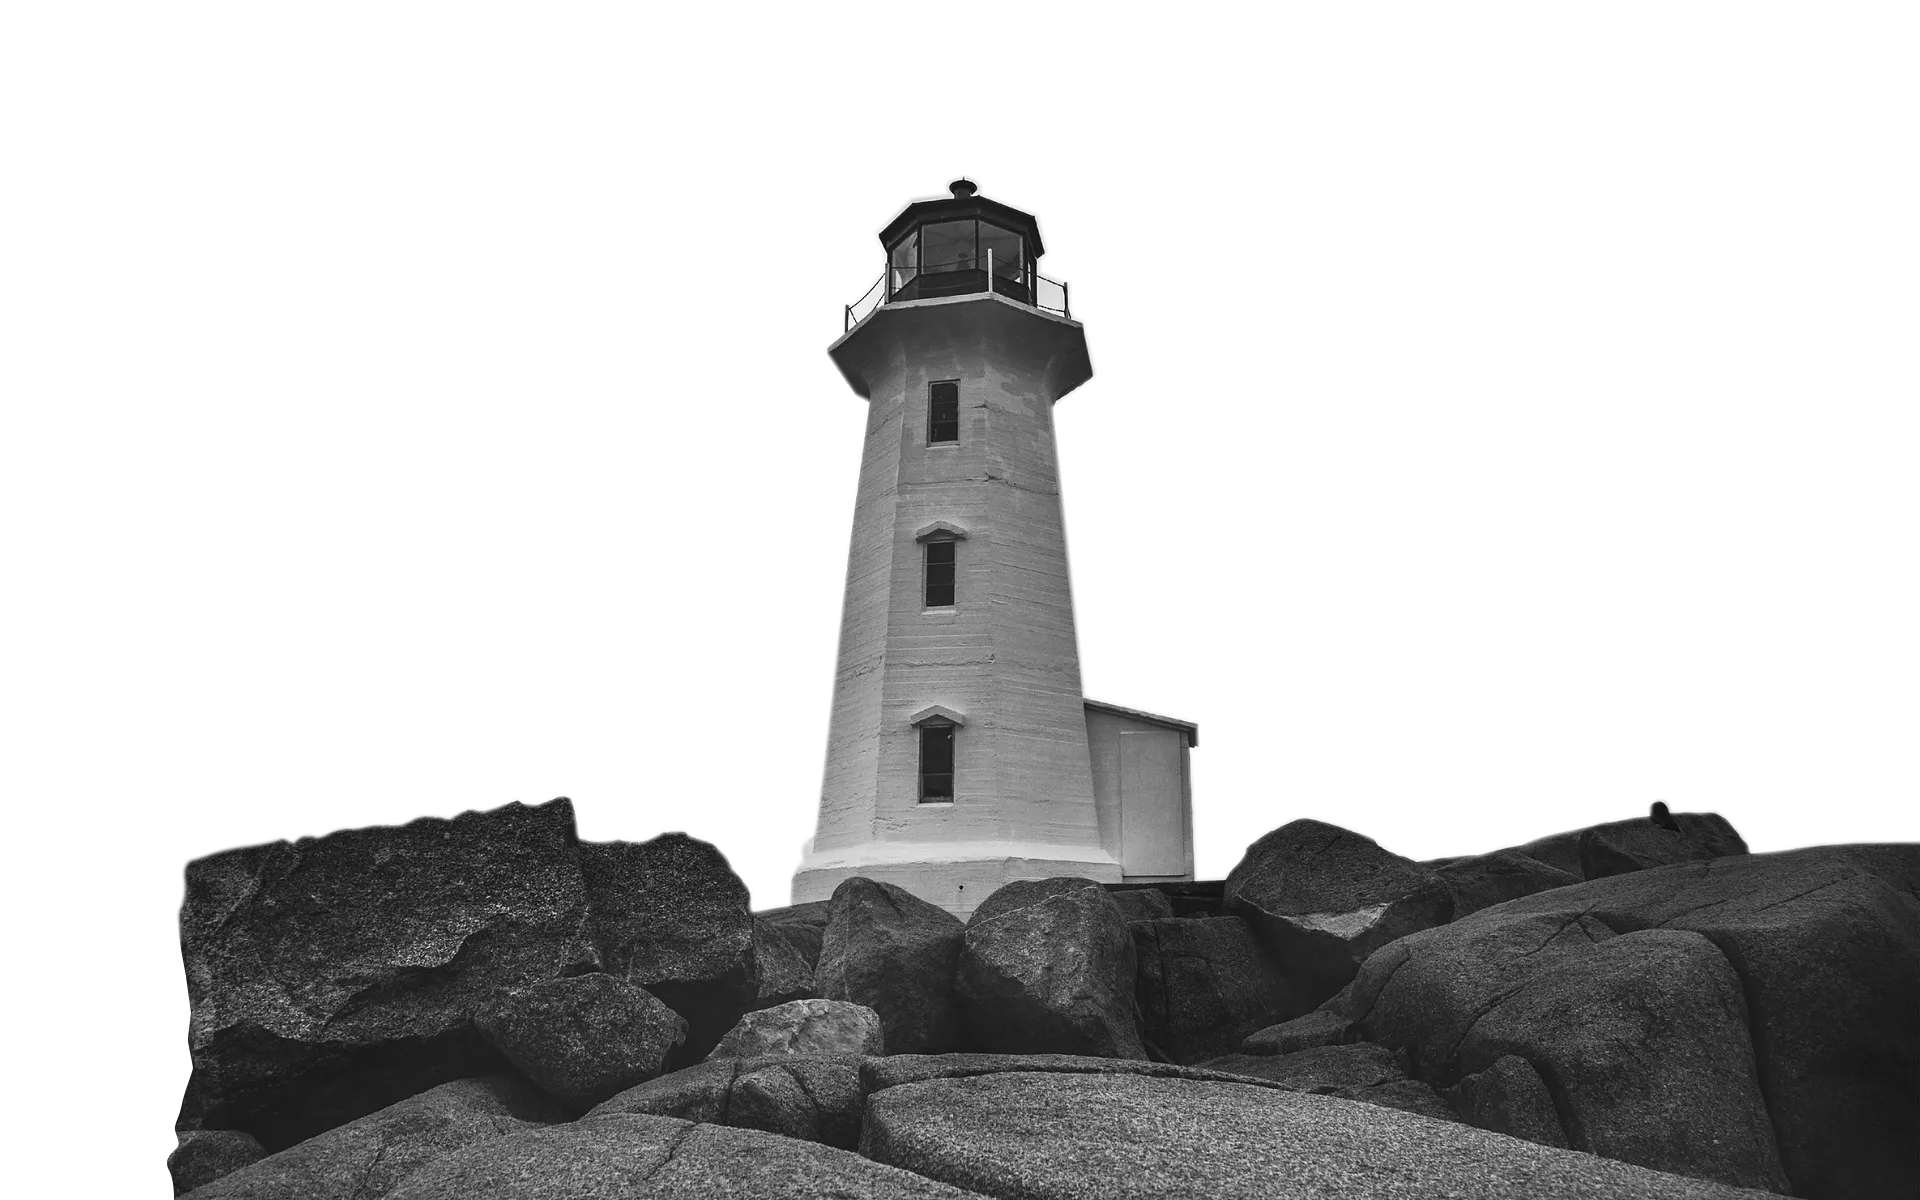 a lighthouse looking out for danger or malicious actors